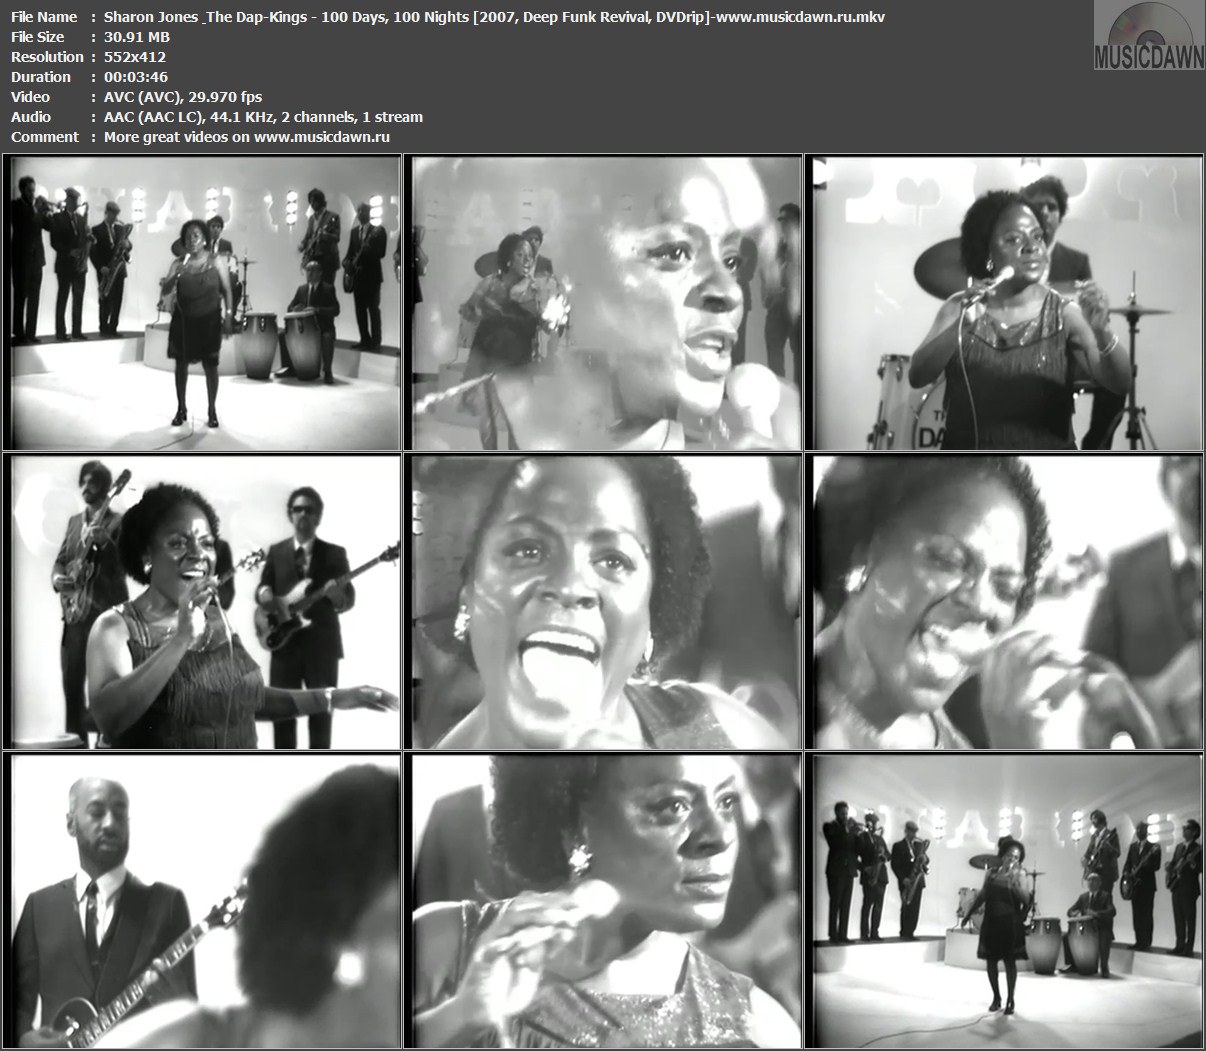 Sharon Jones and the Dap-Kings - How Long Do I Have To Wait For You